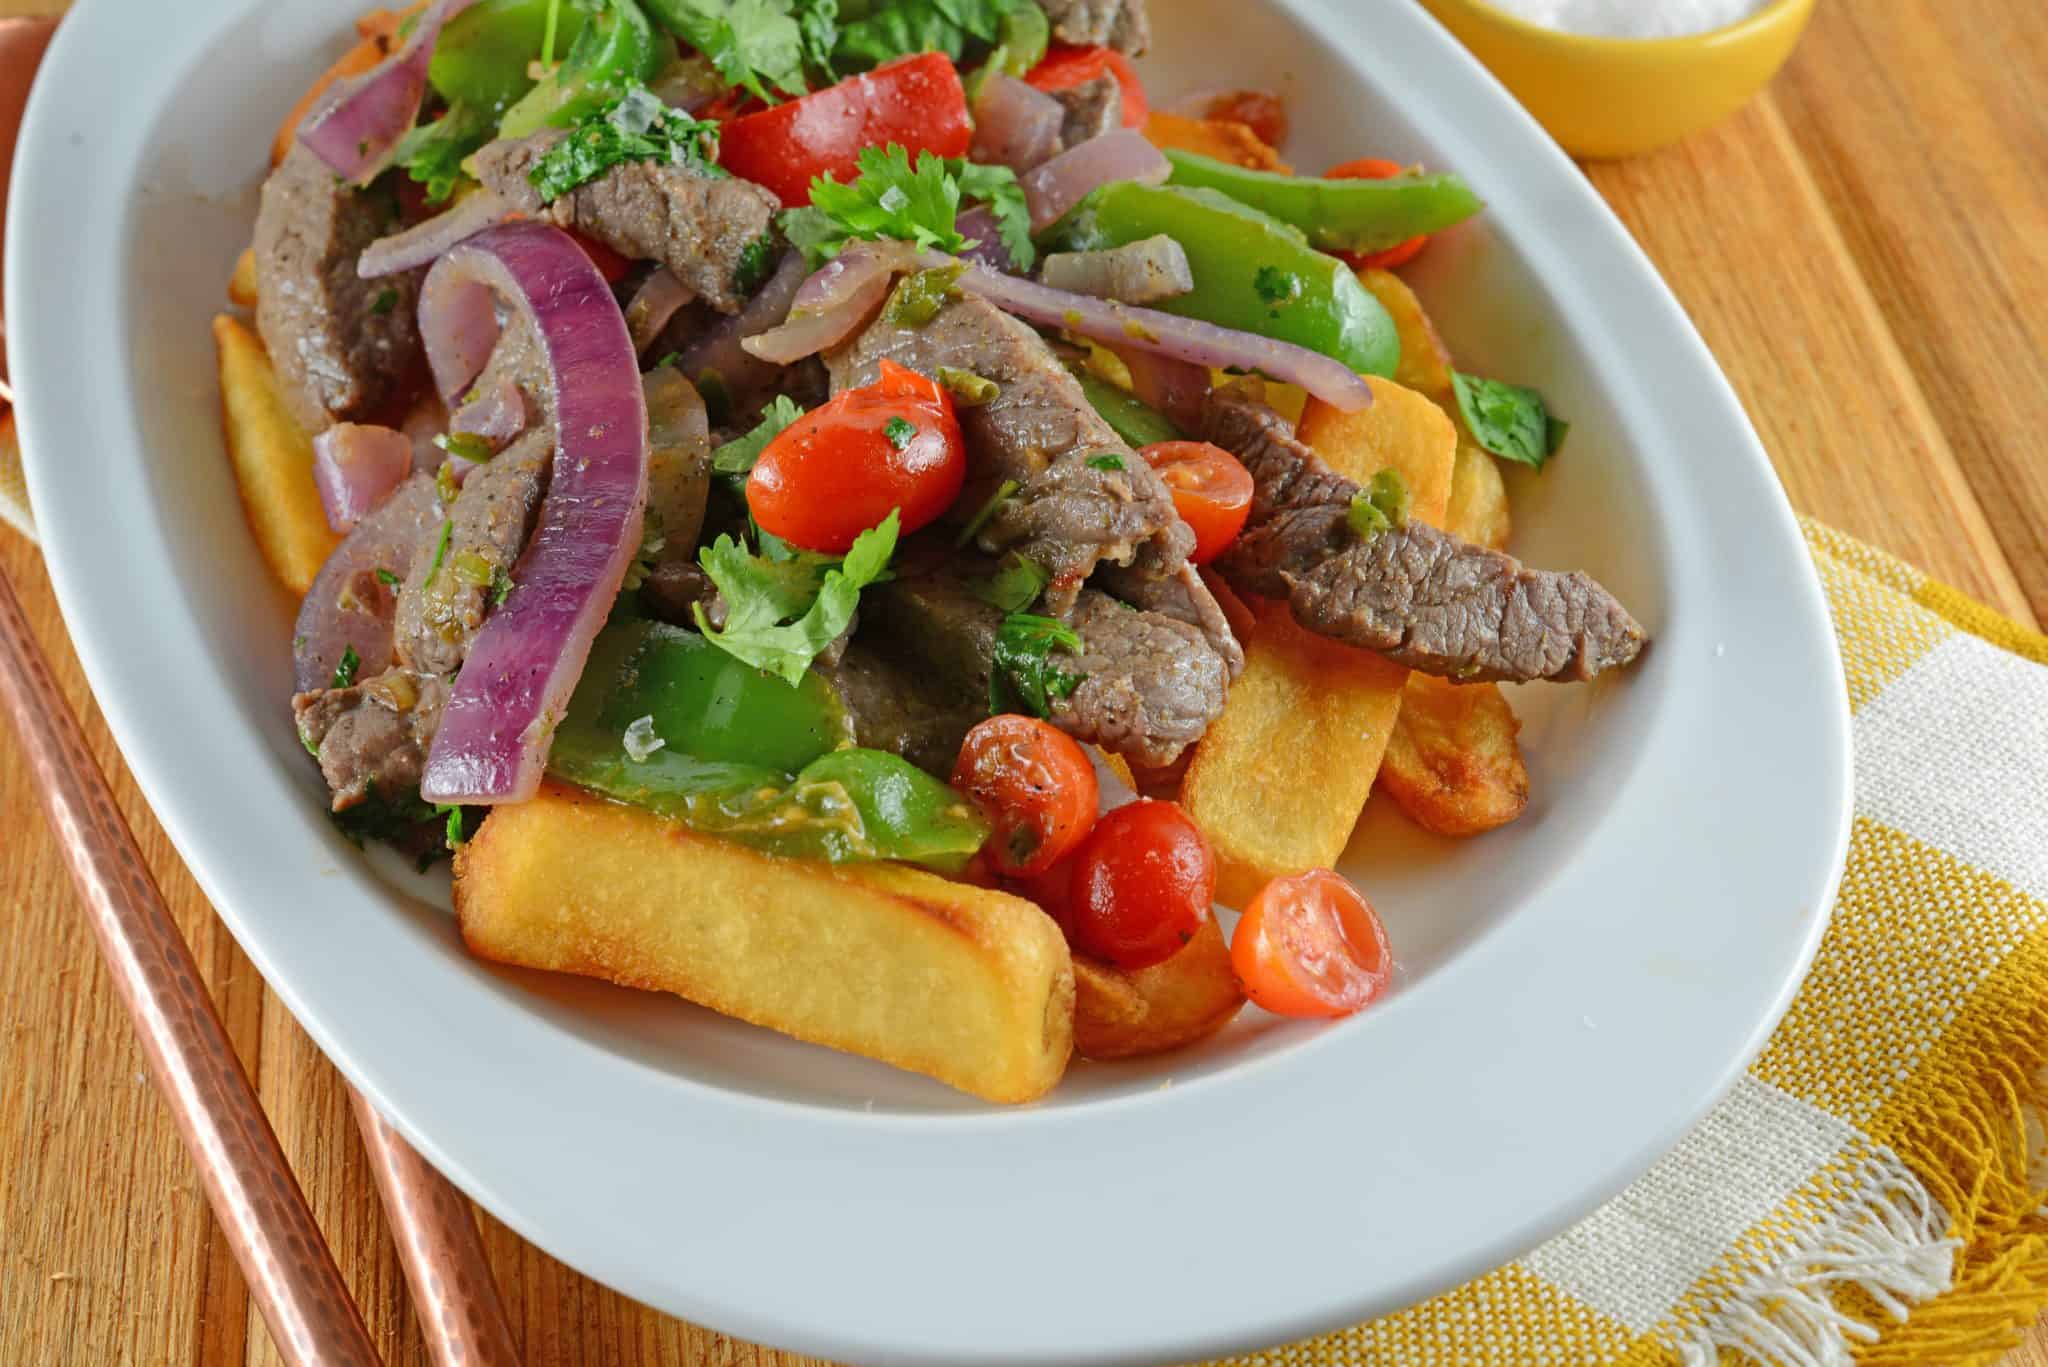 Lomo Saltado is a Peruvian dish using tender steak, onions, tomatoes, bell peppers and jalapenos over crispy French fries.